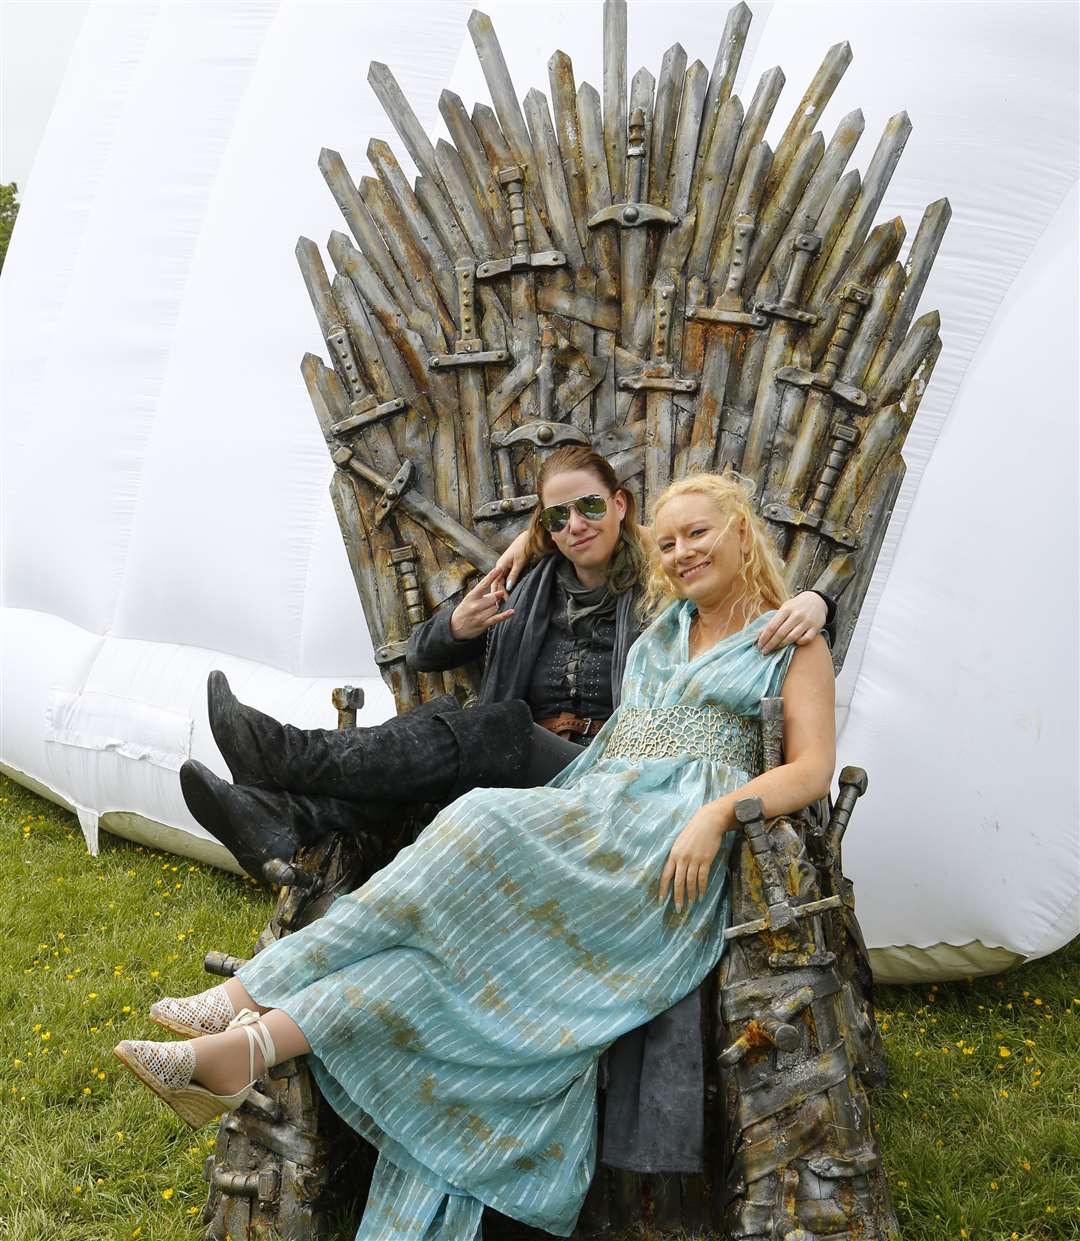 Anita Gander and Victoria Schabacker take a seat on the Iron Throne. Pictures: Andy Jones